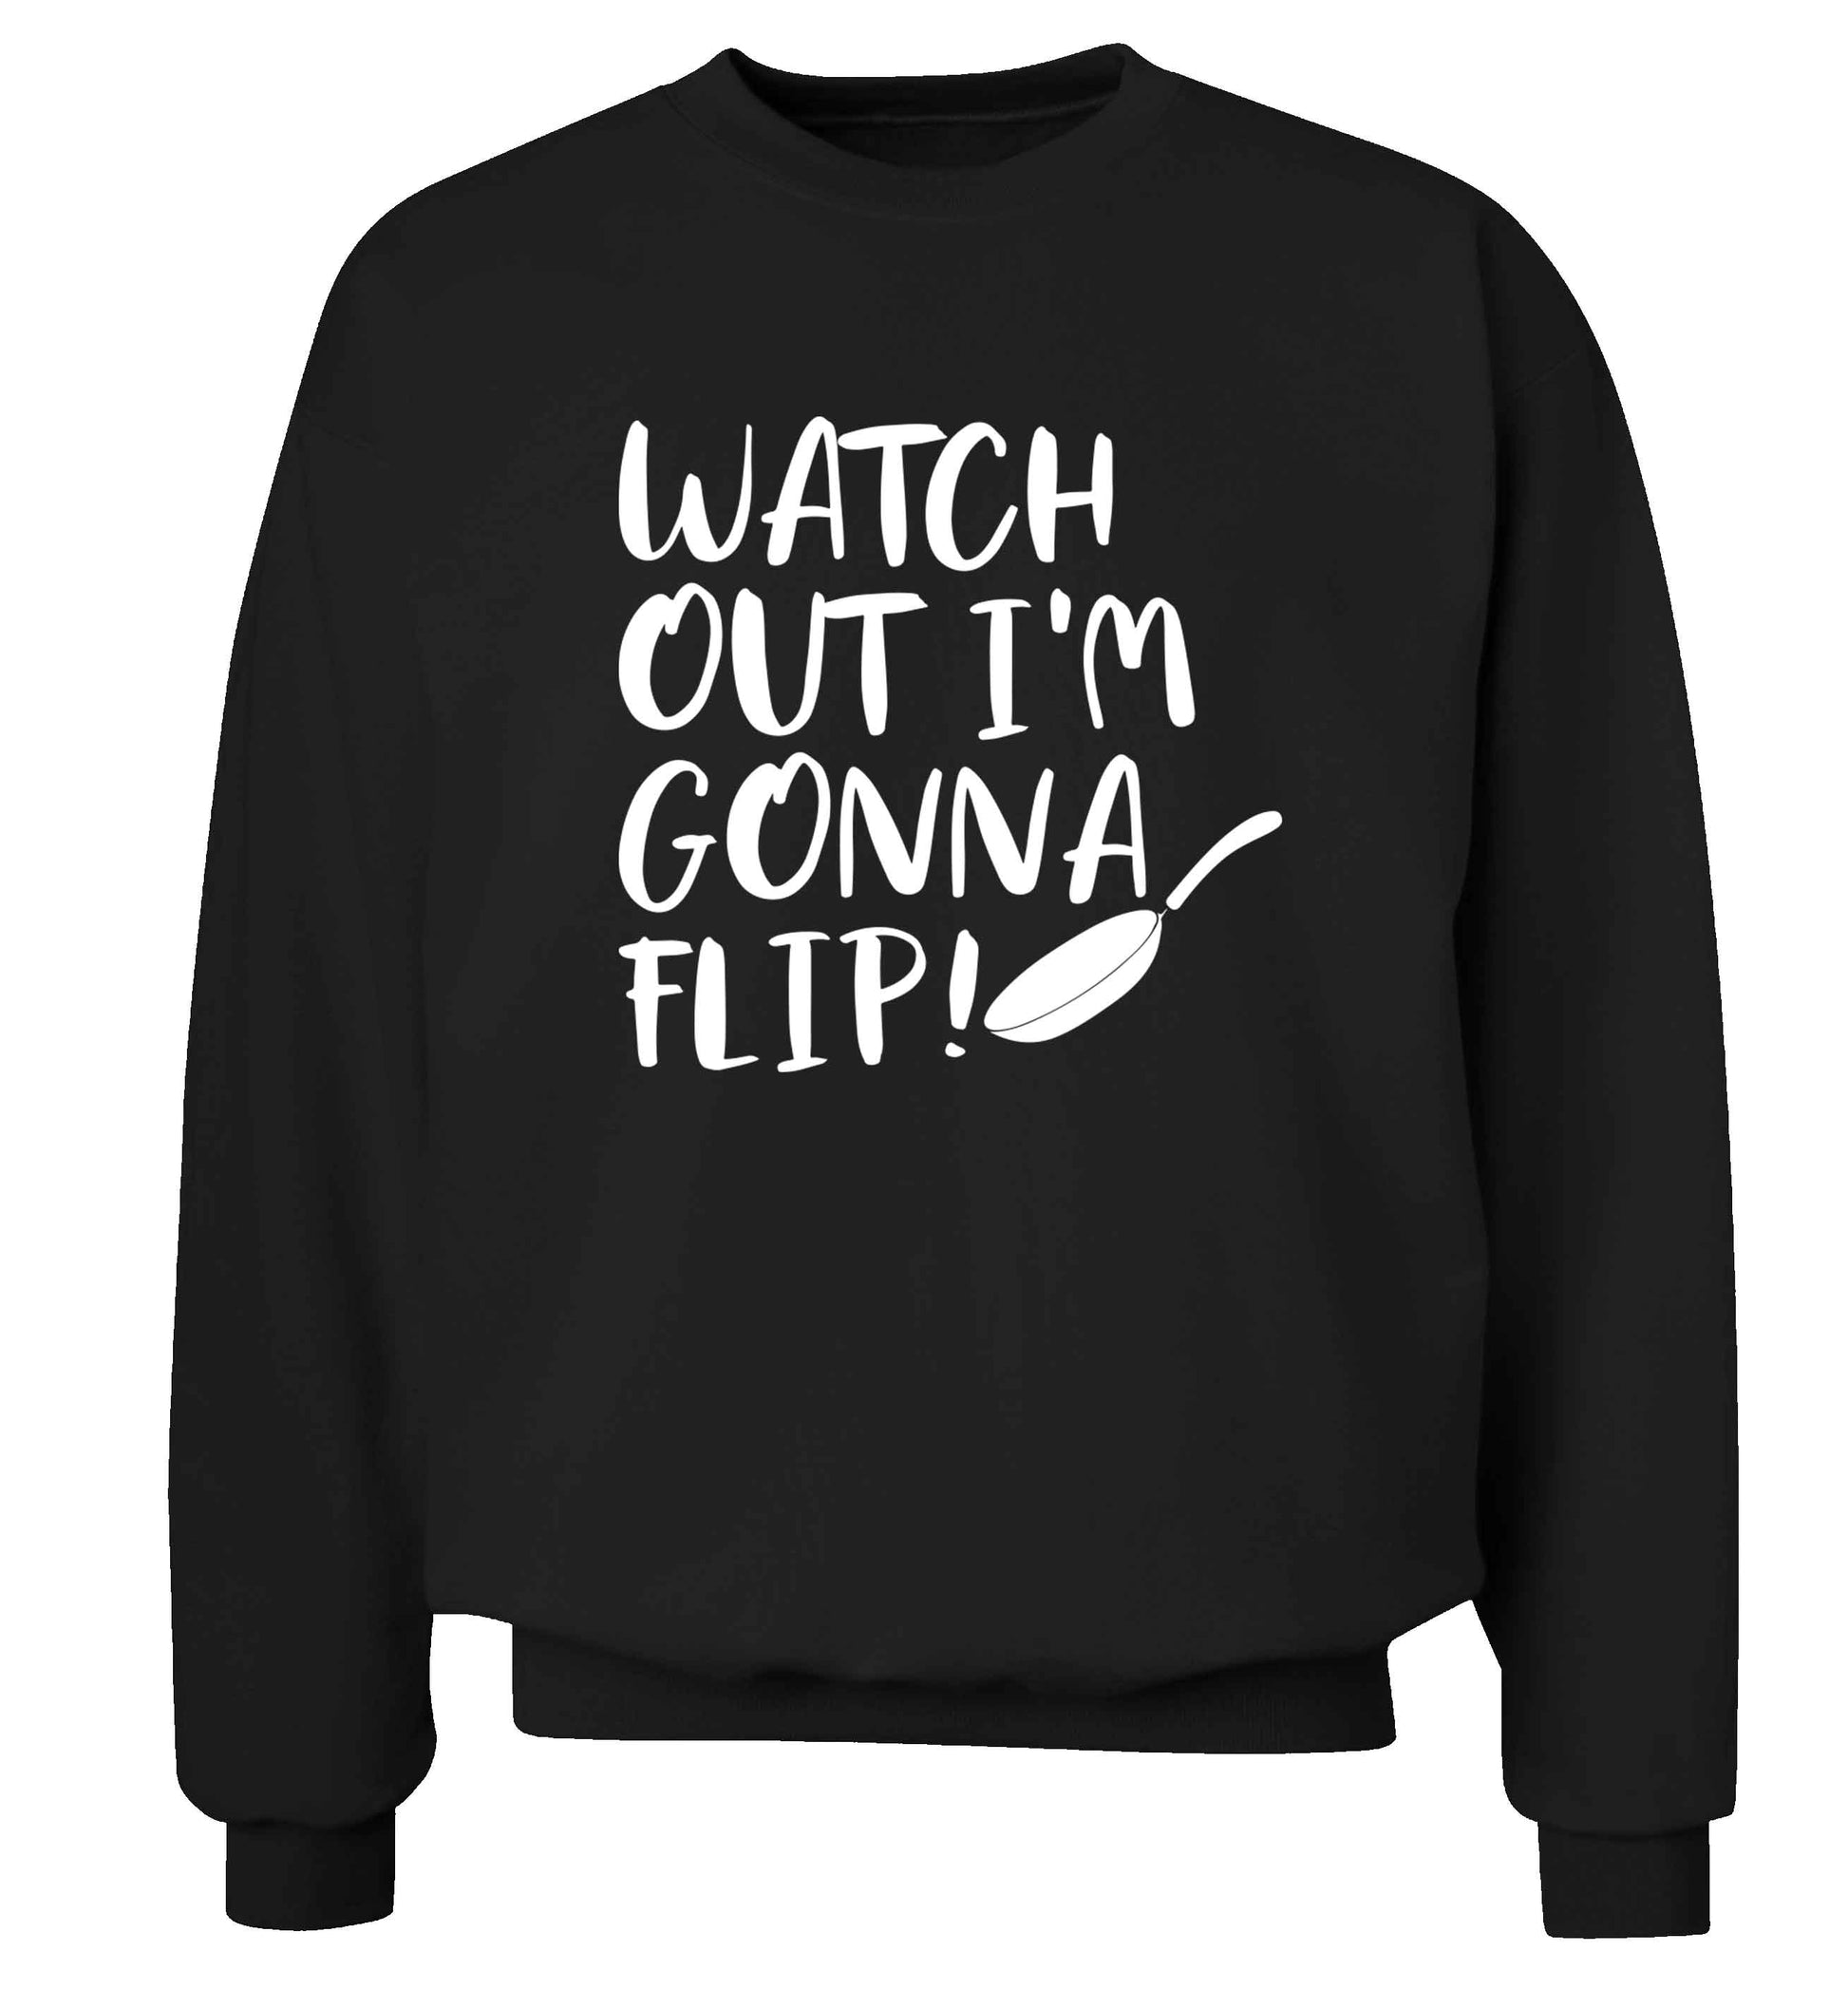 Watch out I'm gonna flip! adult's unisex black sweater 2XL